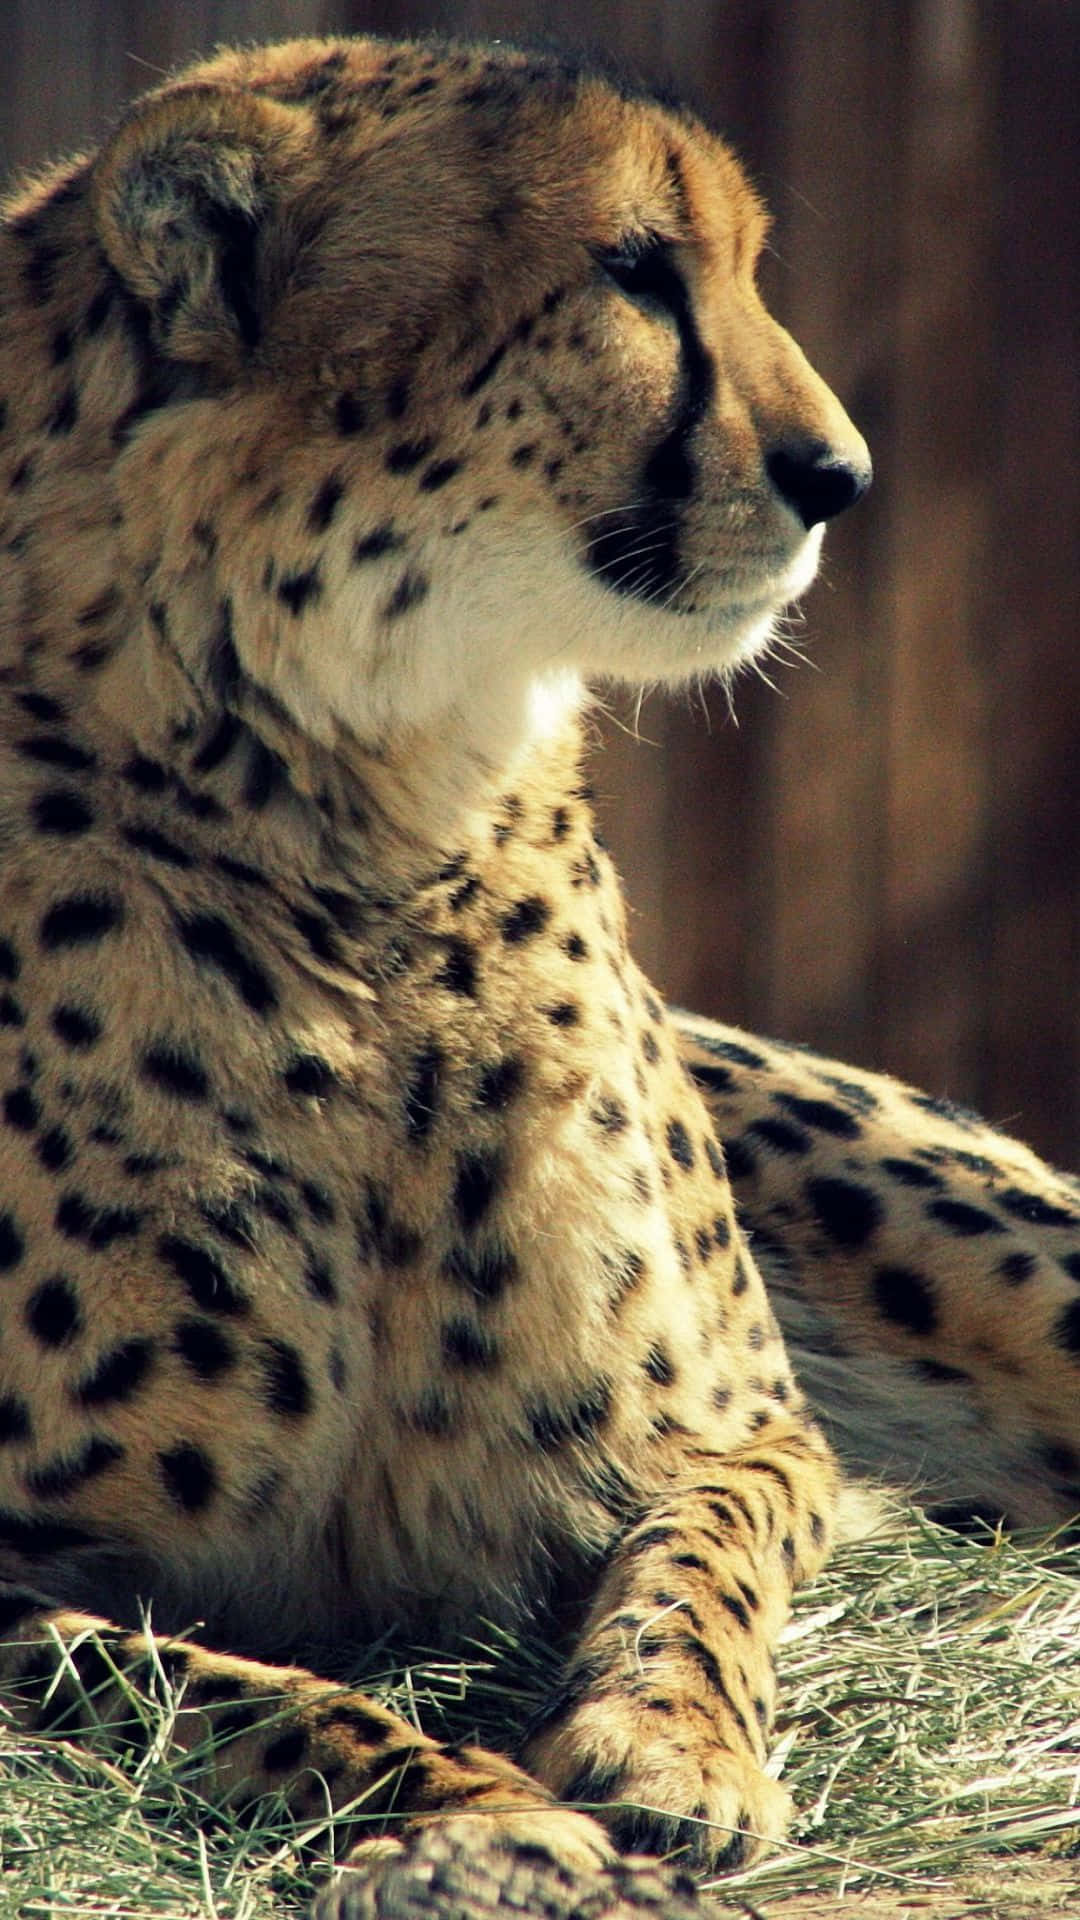 Enhance your device's style with a Cheetah Iphone wallpaper! Wallpaper